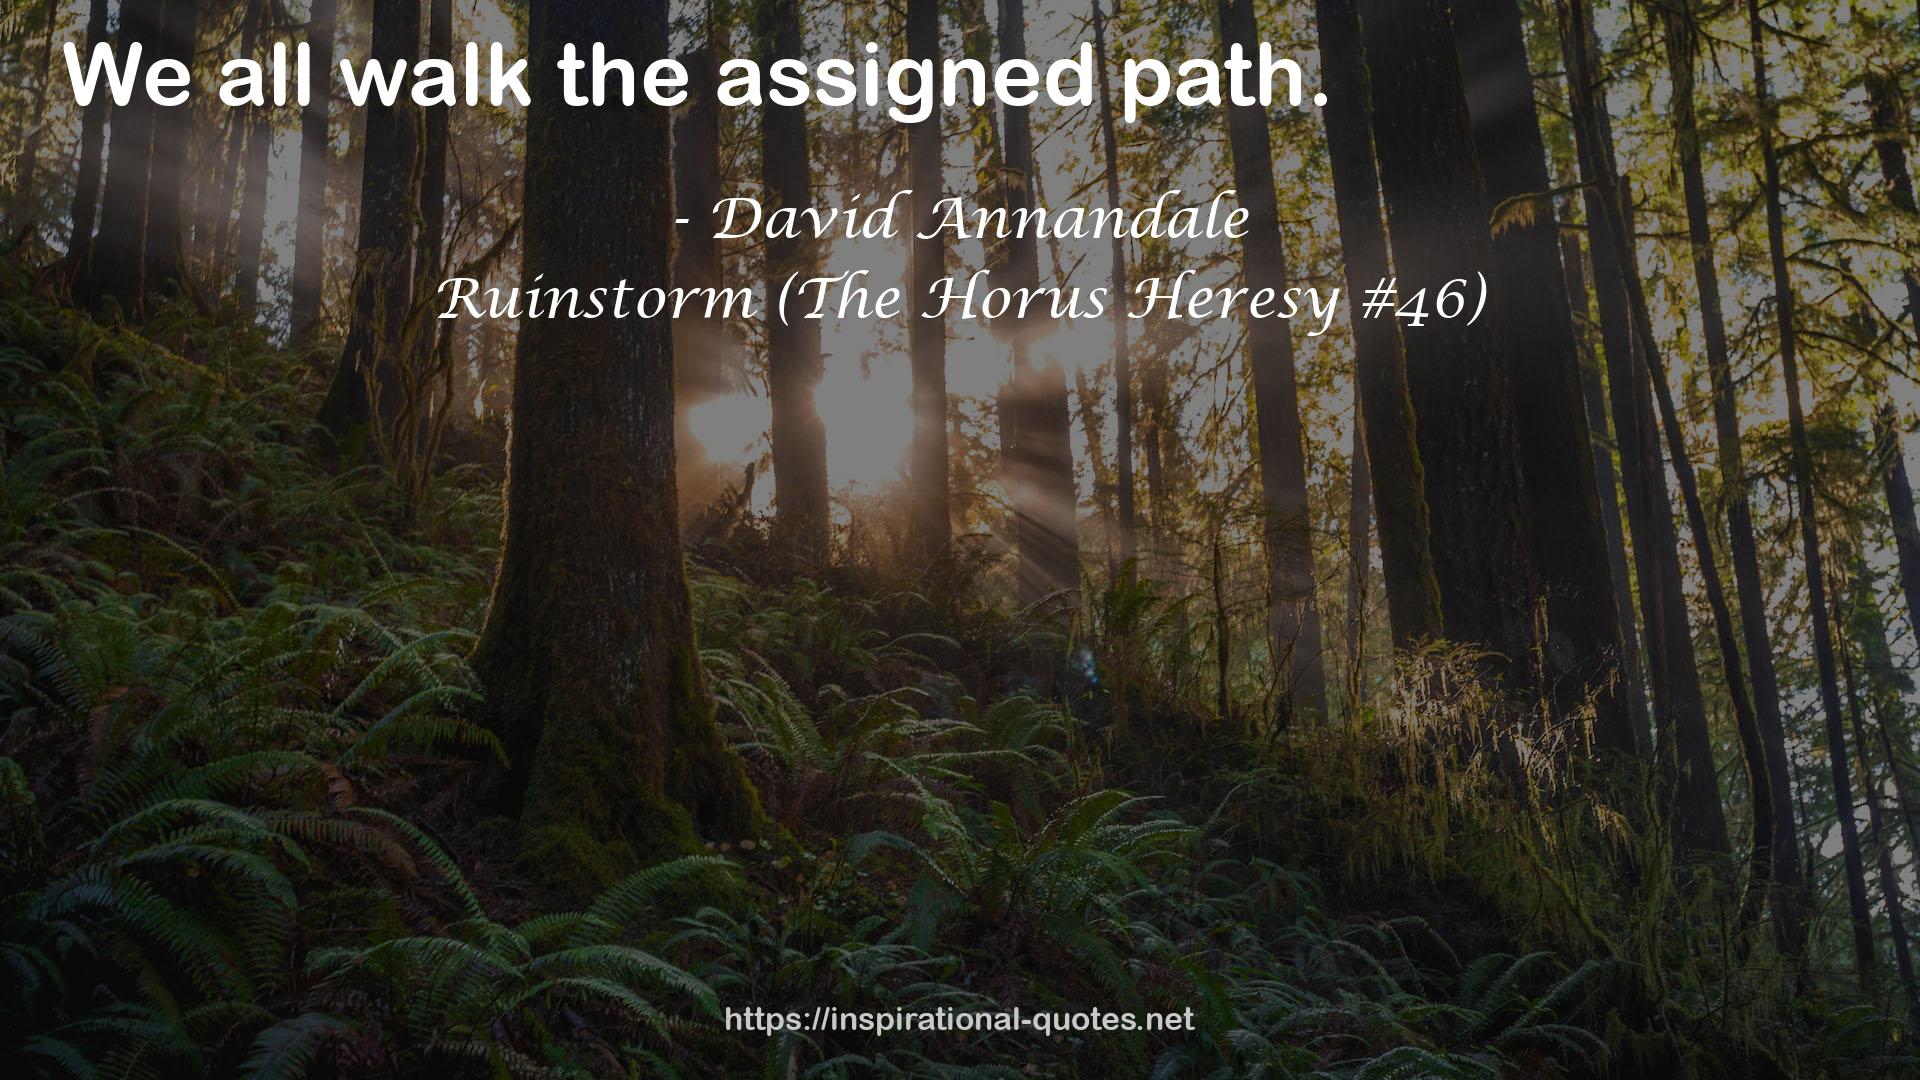 David Annandale QUOTES